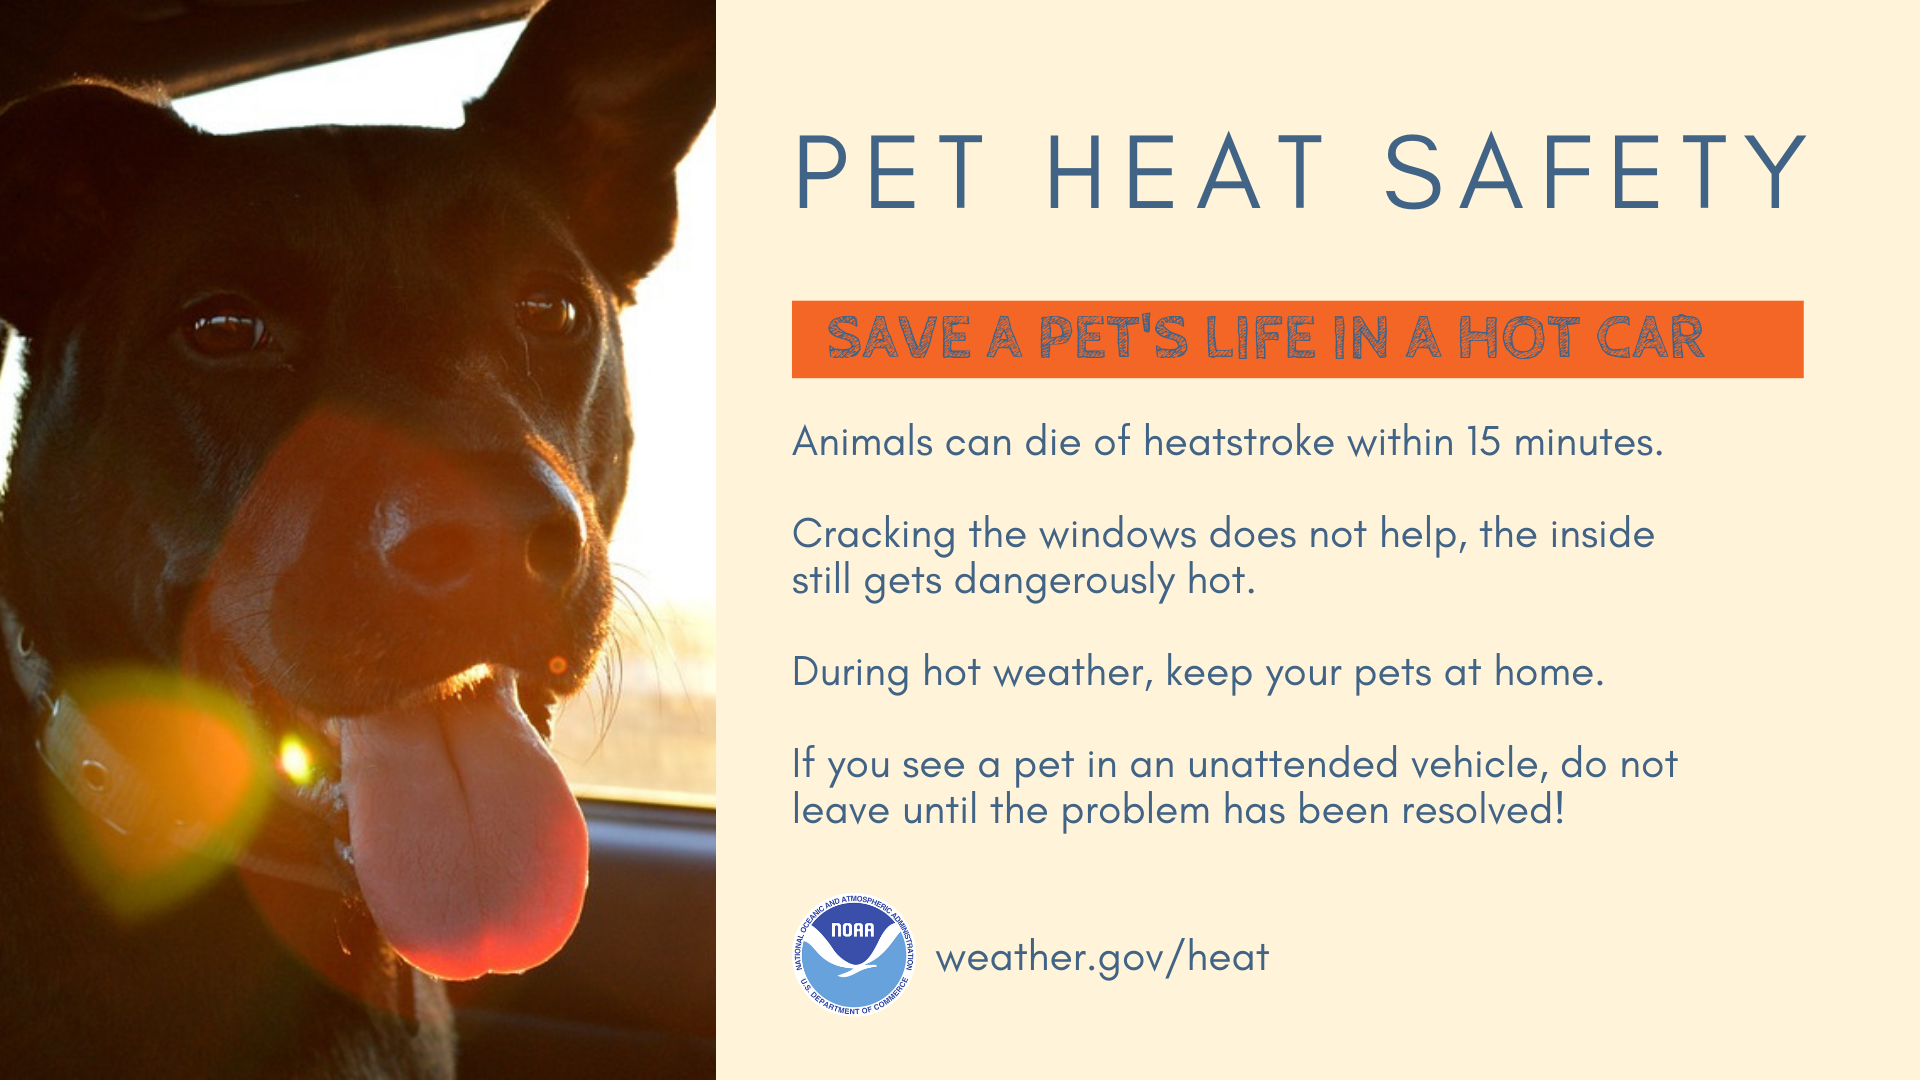 Pet Heat Safety: Save a pet's life in a hot car. Animals can die of heatstroke within 15 minutes. Cracking the windows does not help, the inside still gets dangerously hot. During hot weather, keep your pets at home. If you see a pet in an uattended vehicle, do not leave until the problem has been resolved.